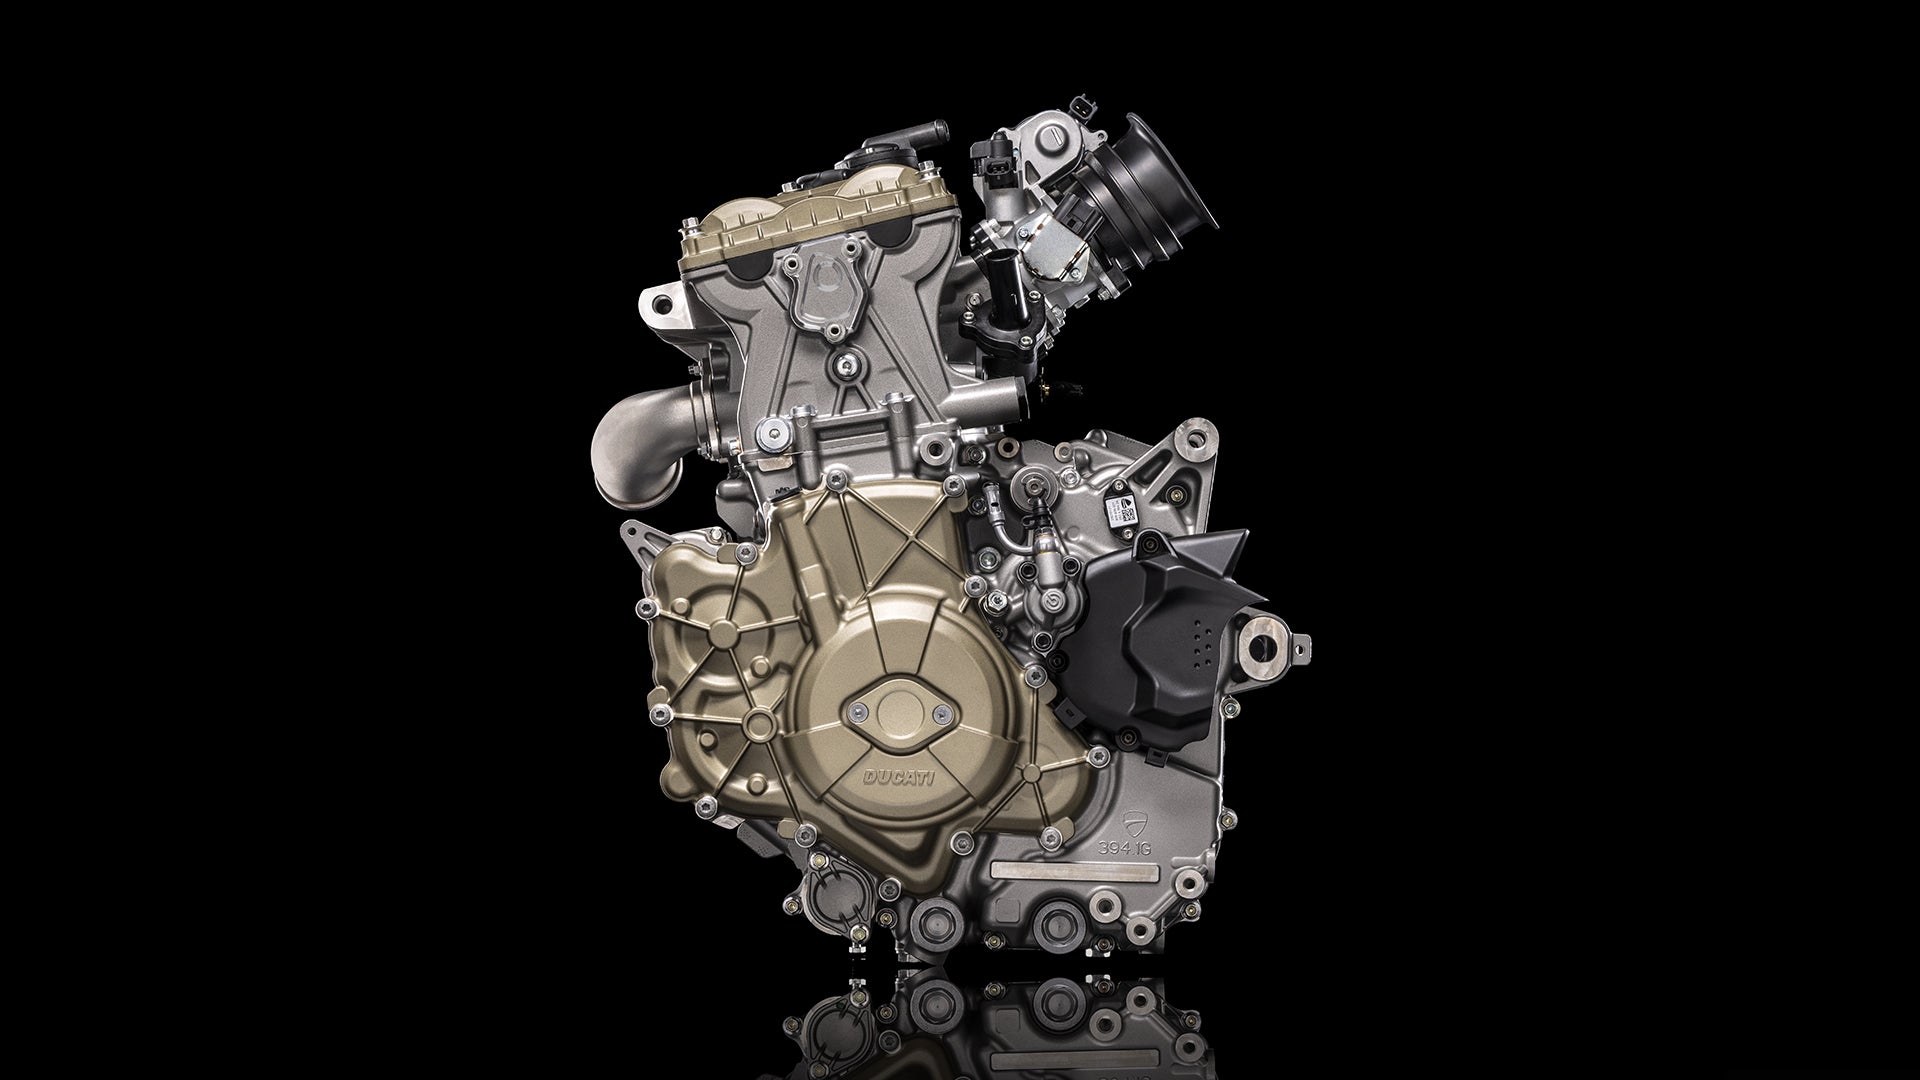 The most powerful single-cylinder engine ever created has been constructed by Ducati.